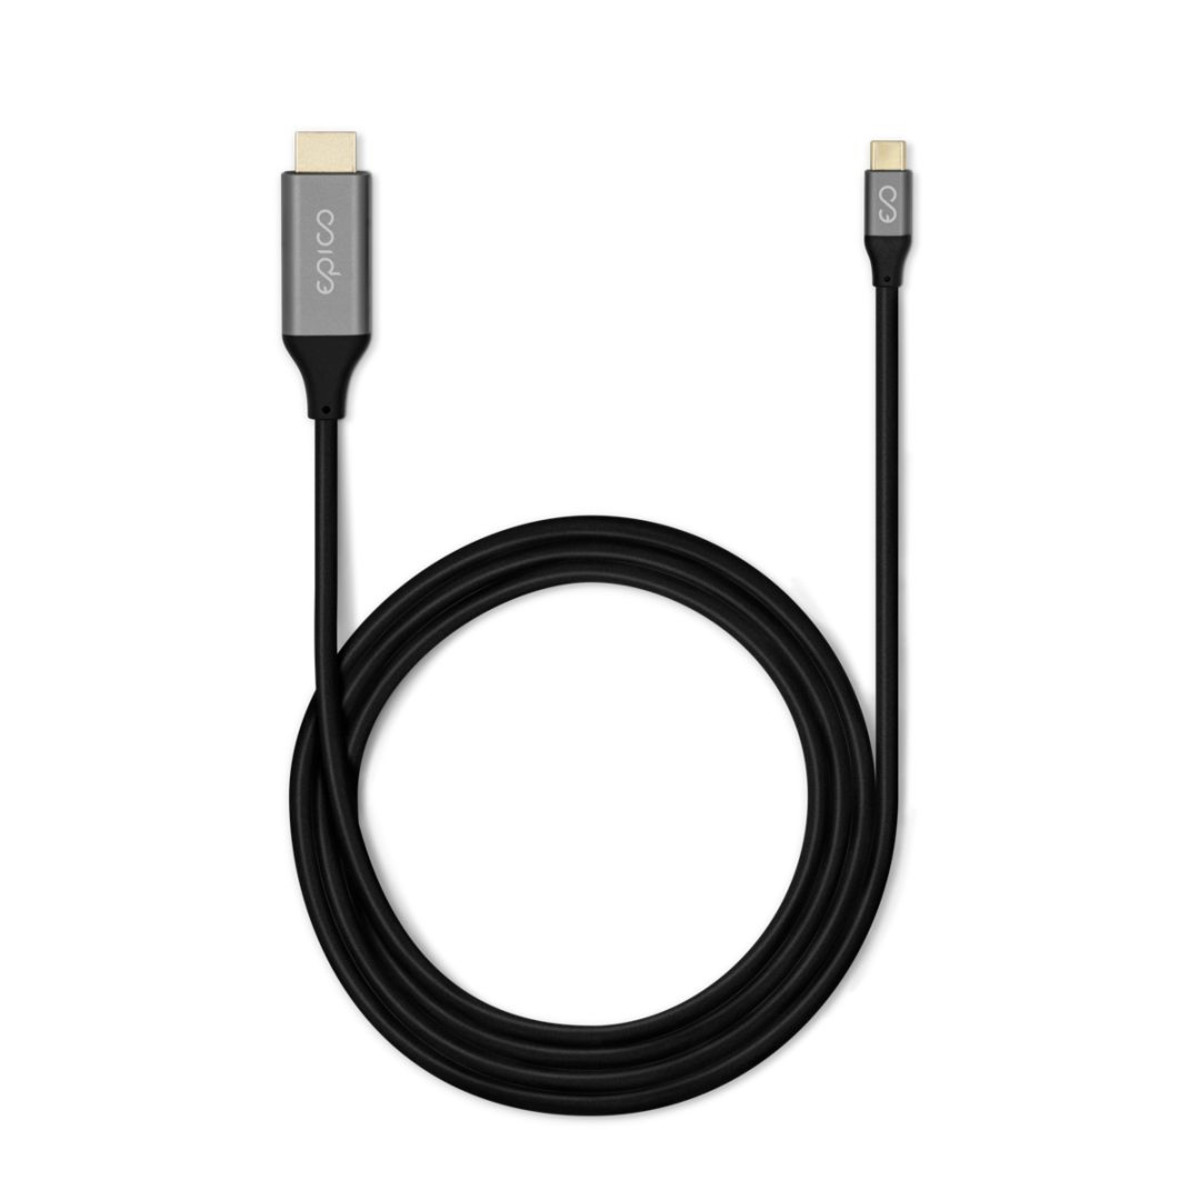 USB-C To HDMI Cable 1.8m - Grey